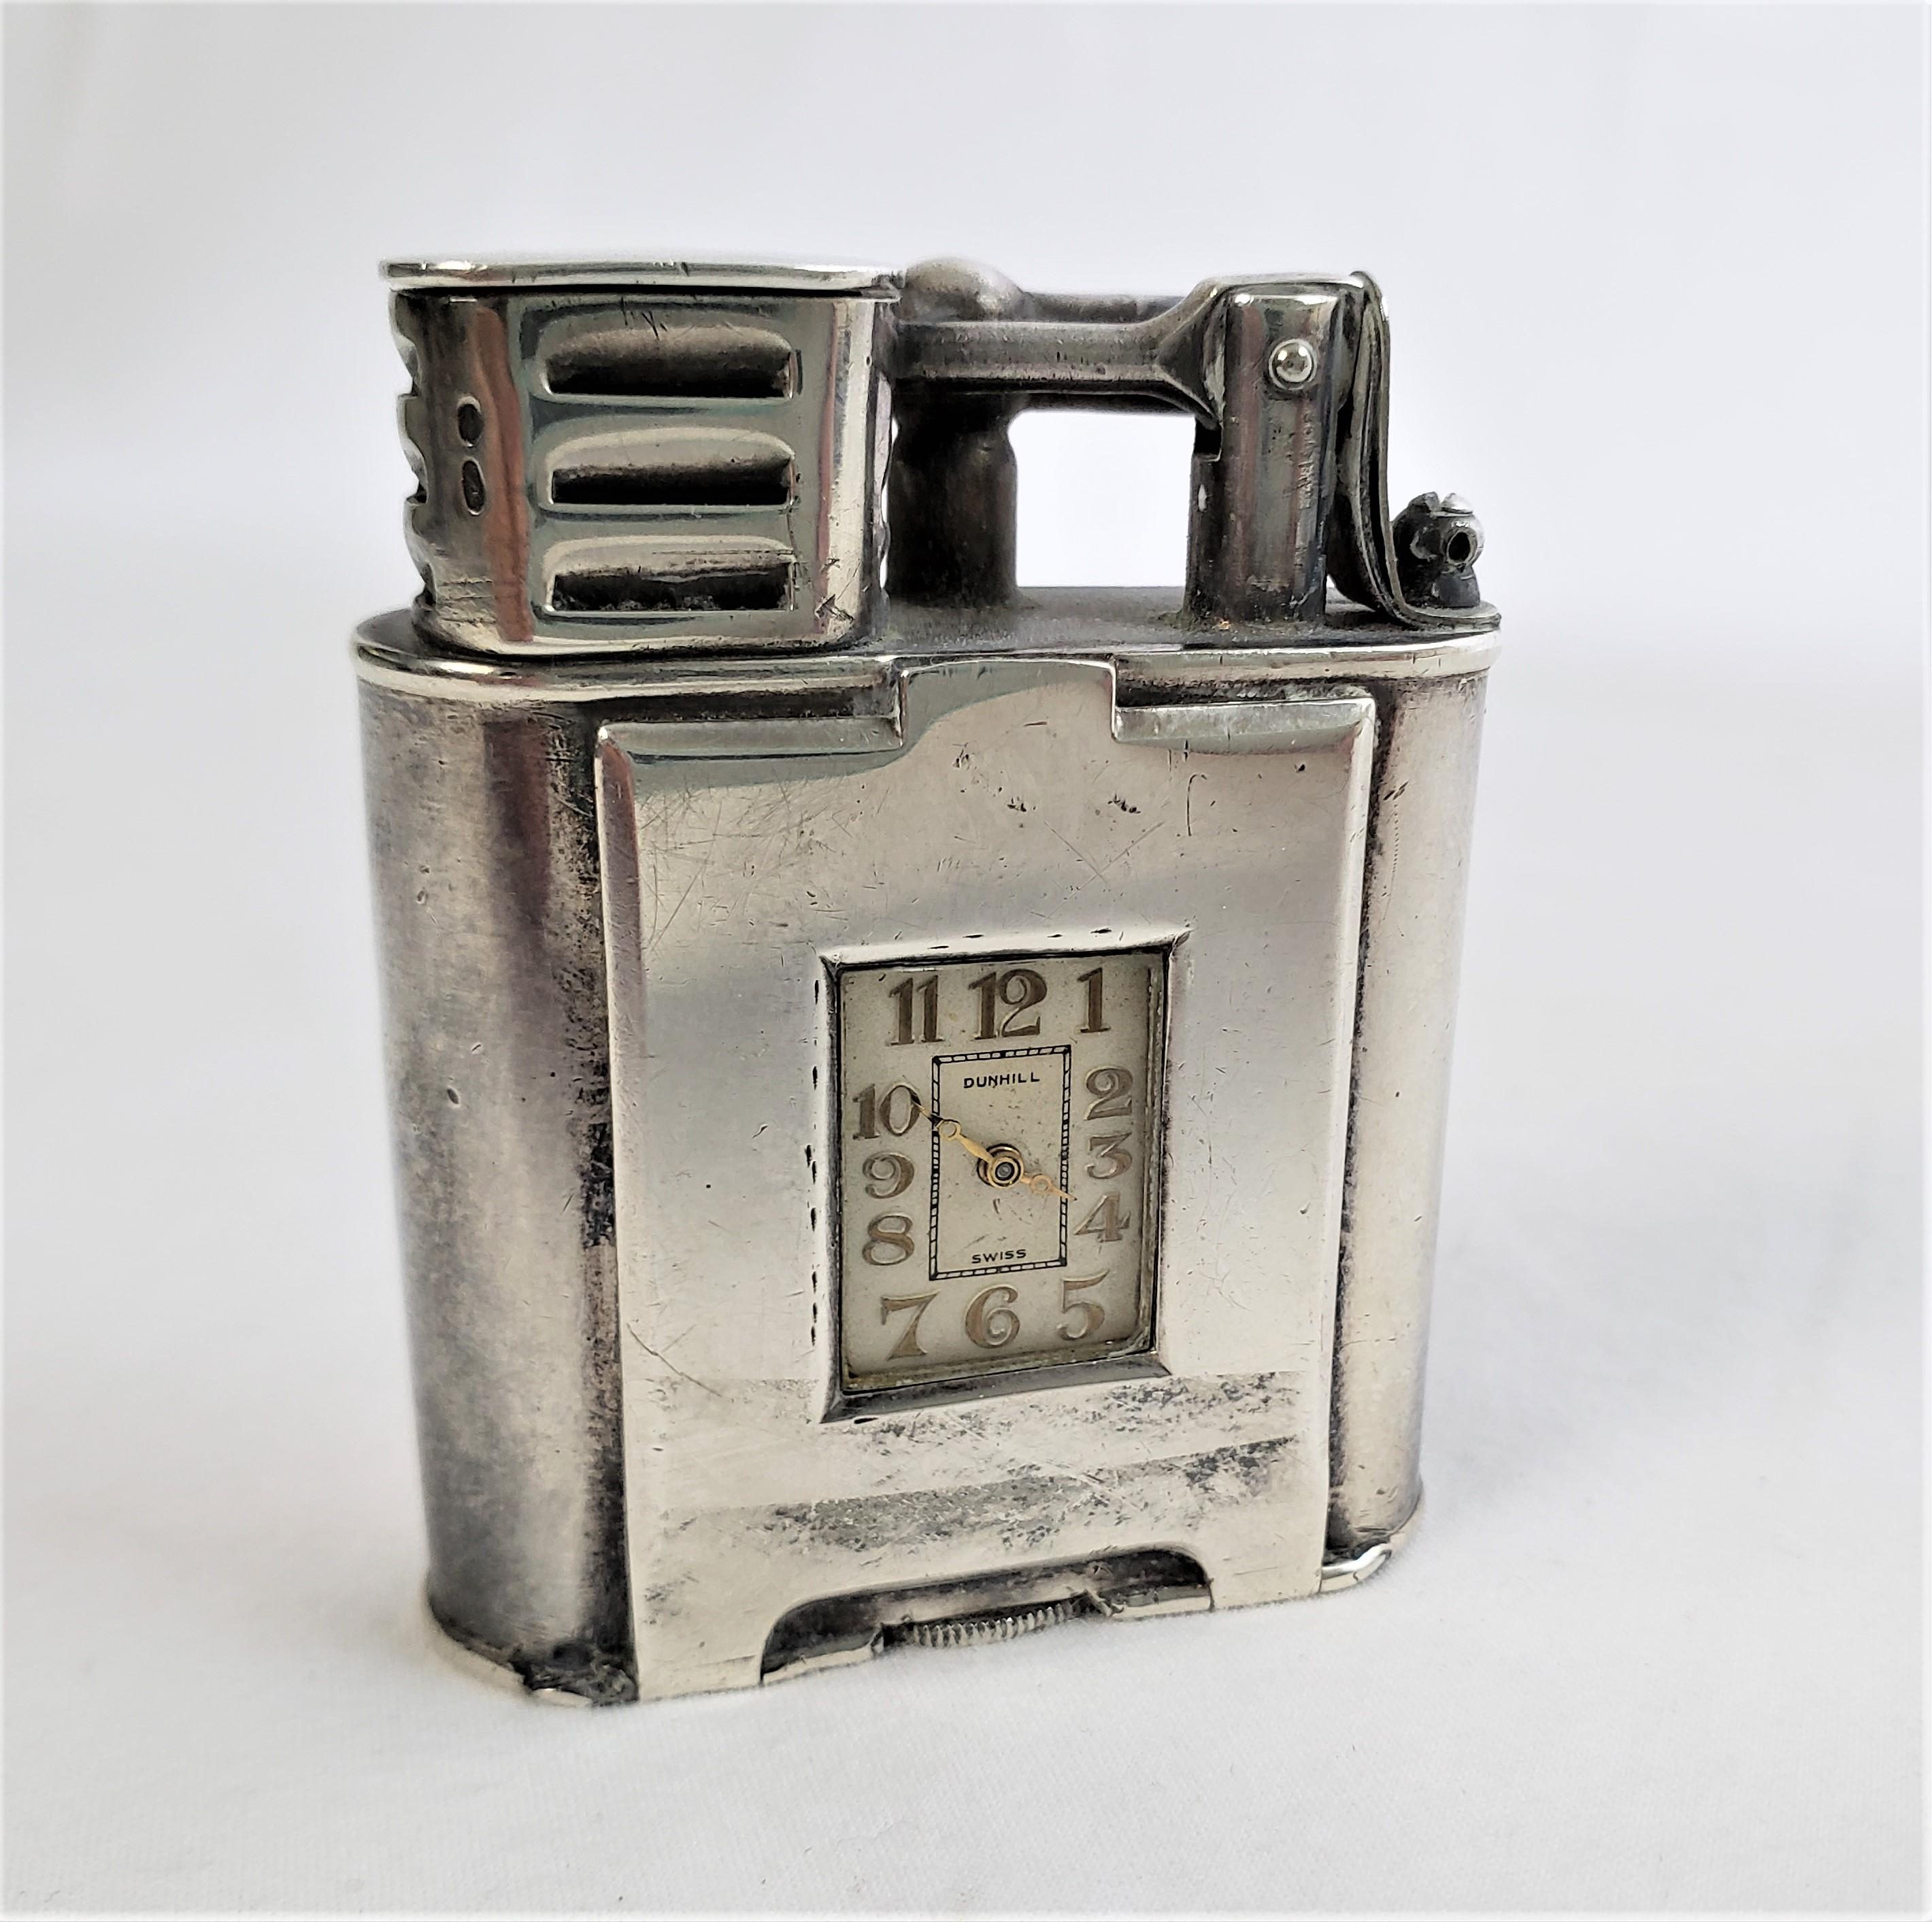 This antique pocket lighter was made by the renowned Dunhill company in approximately 1920 and done in the period Art Deco style. This model is identified as their 'Sports' lighter and the case is composed of sterling silver and features a watch or